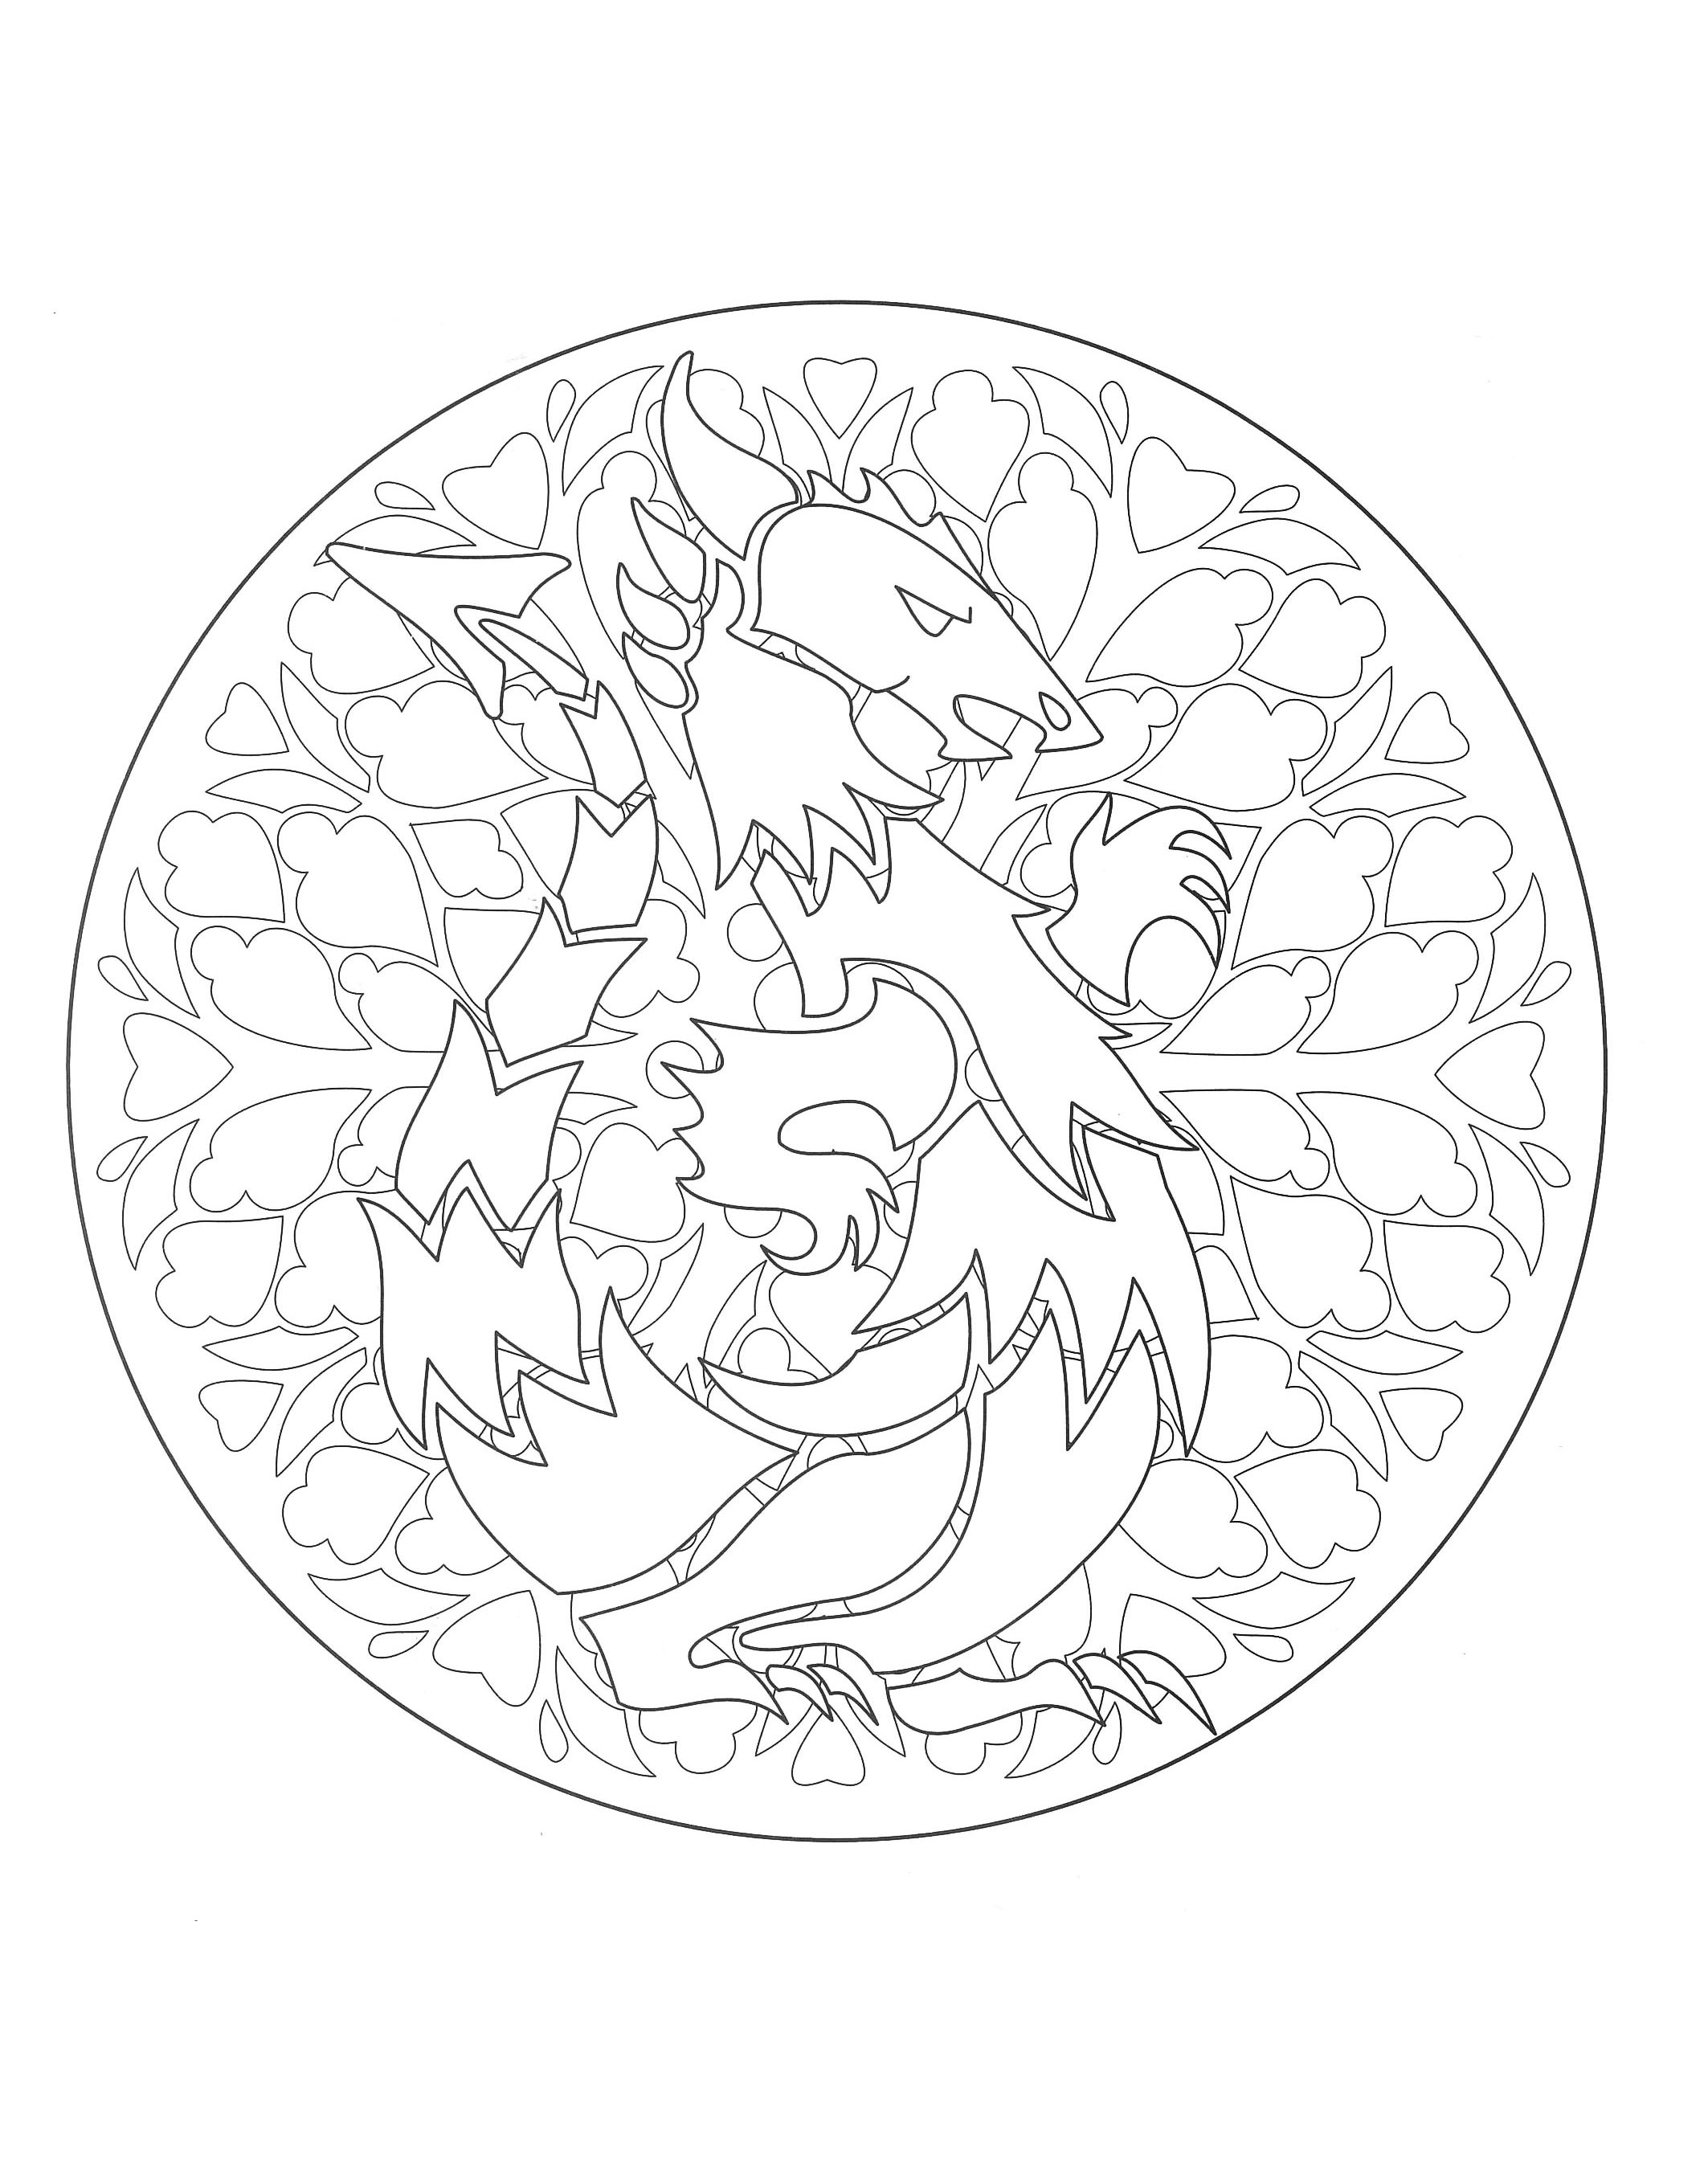 Dragon Mandala Coloring page to print & color. Let your artistic sense choose the best colors to give life to this legendary creature.